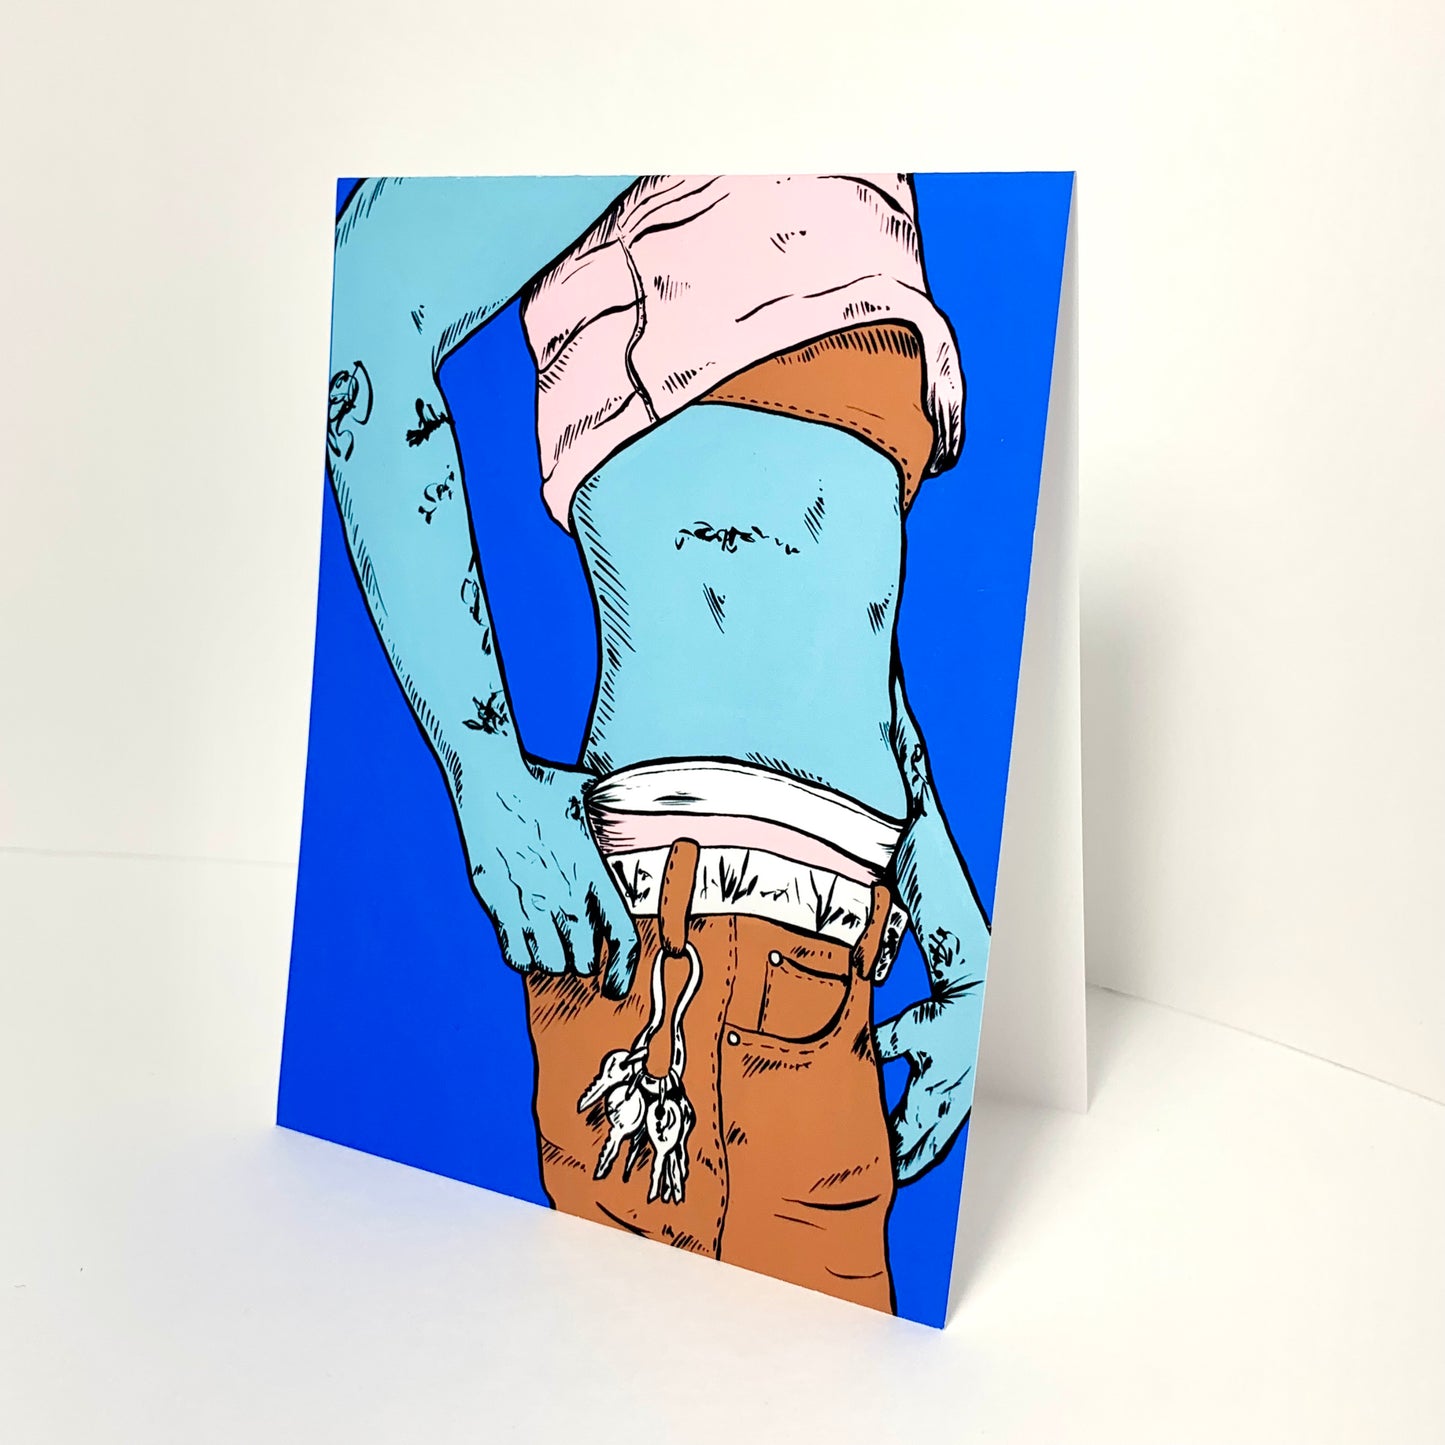 Body Project Greeting Card Sets (3 Cards with Envelopes)